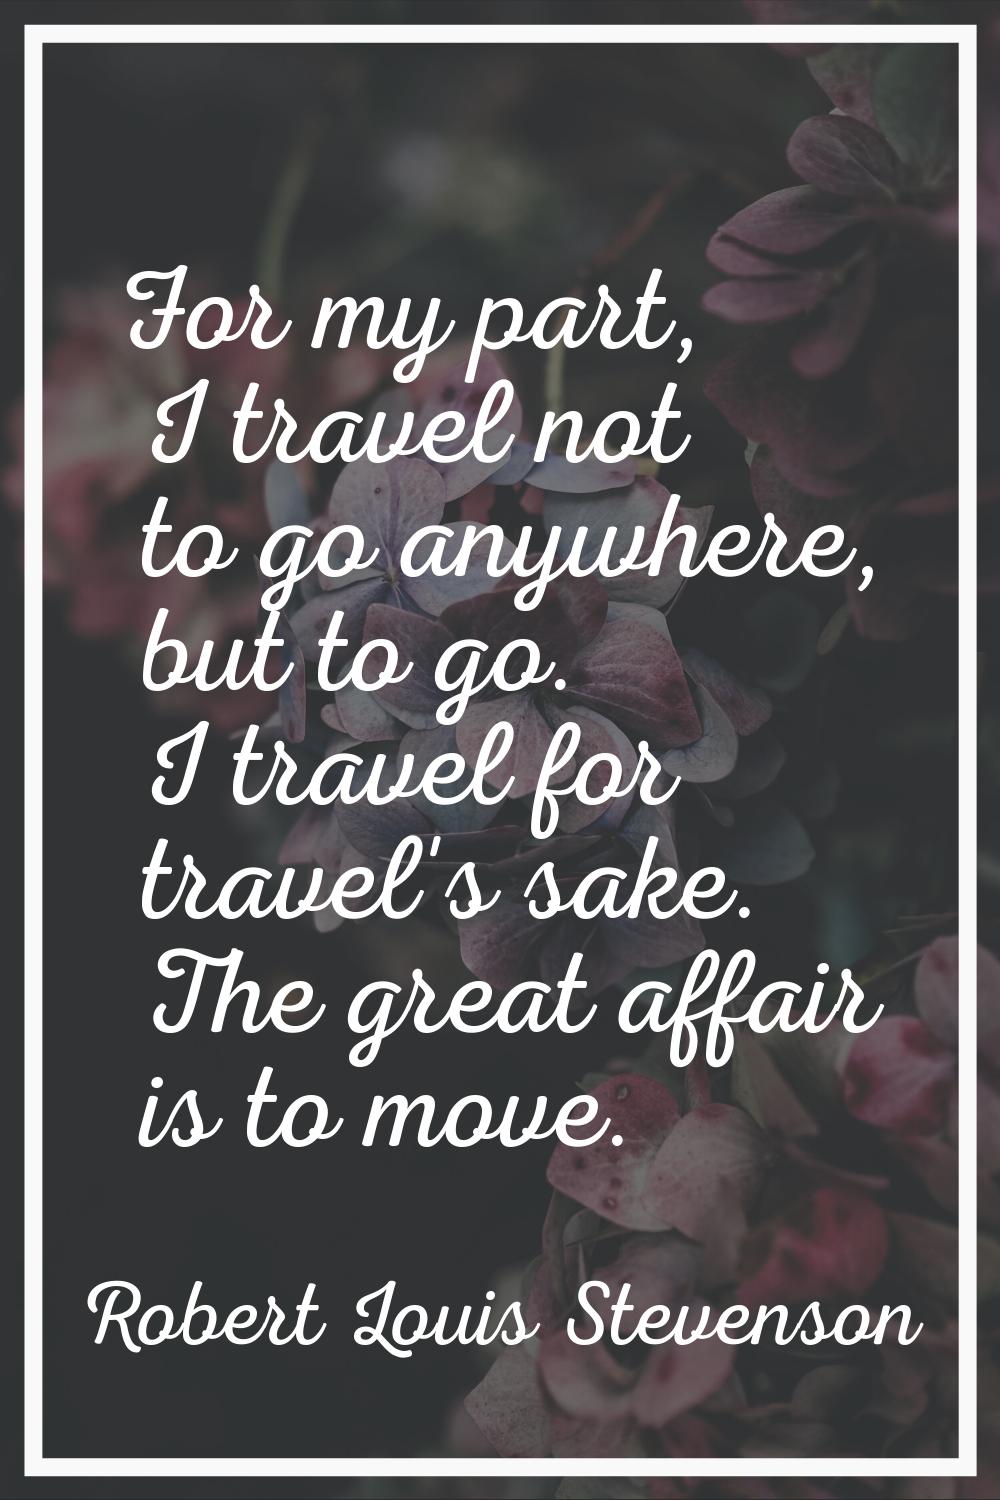 For my part, I travel not to go anywhere, but to go. I travel for travel's sake. The great affair i